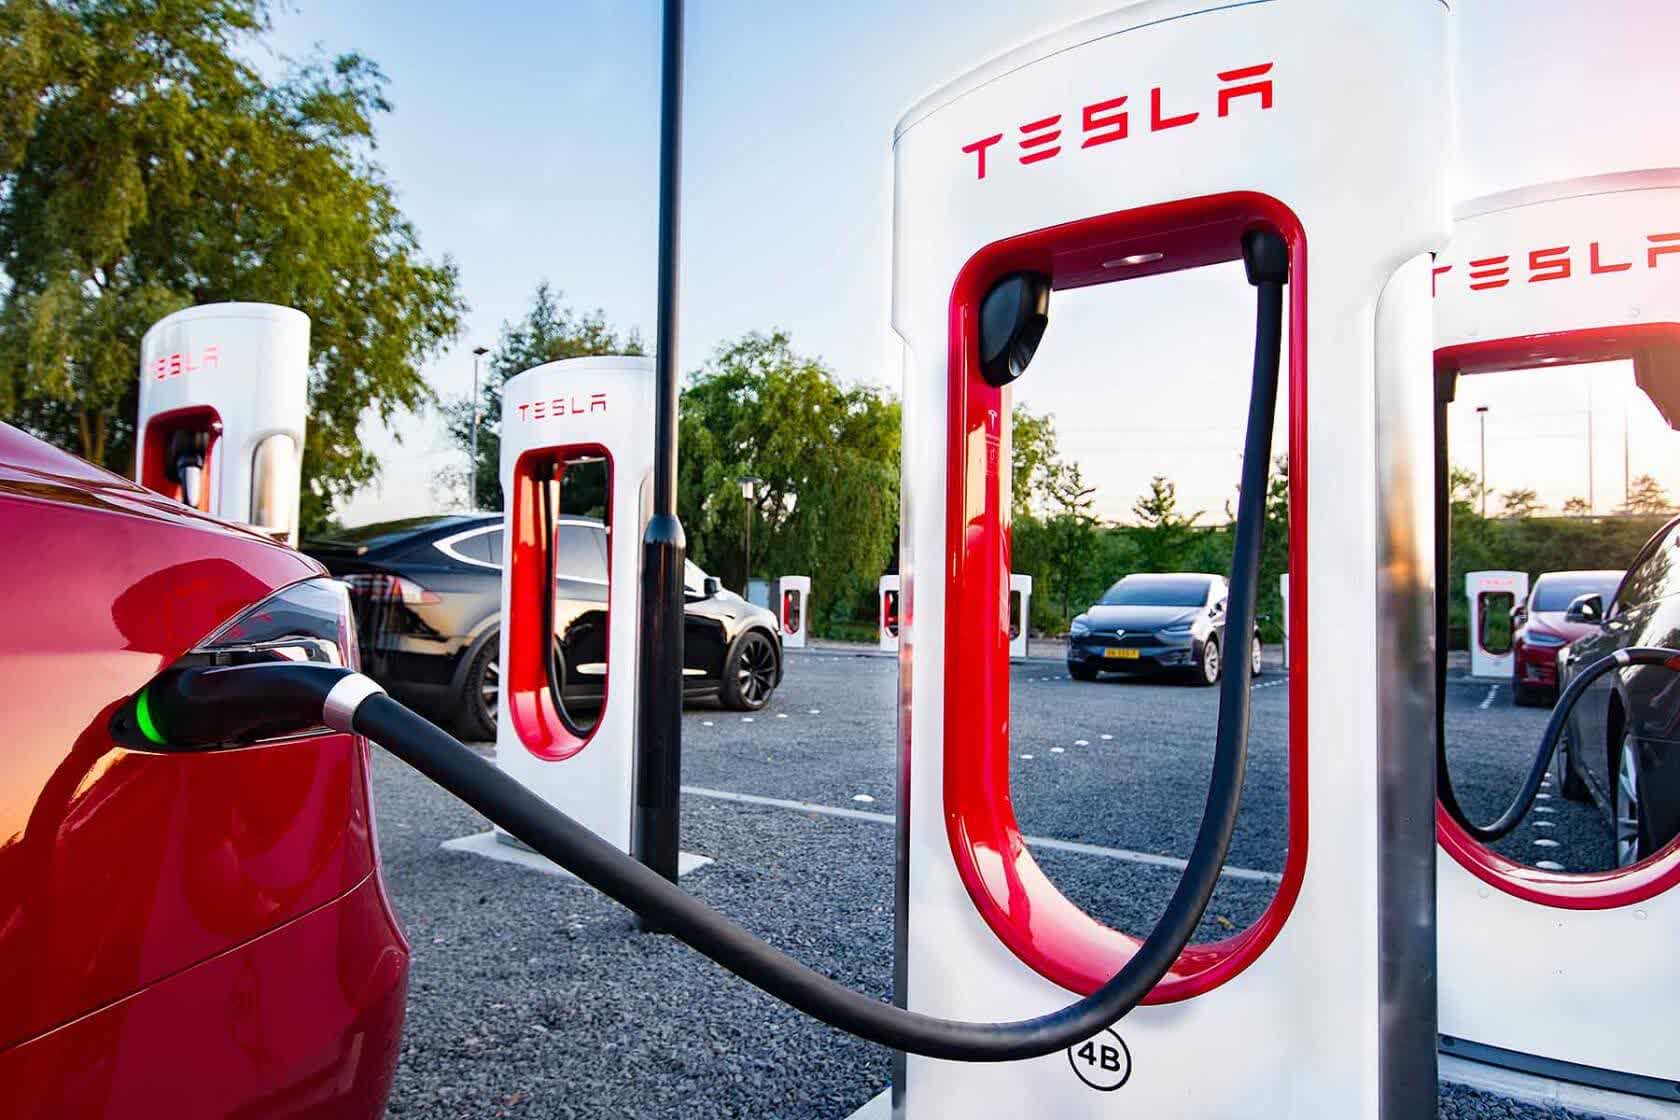 Tesla will open Superchargers to other EVs later this year